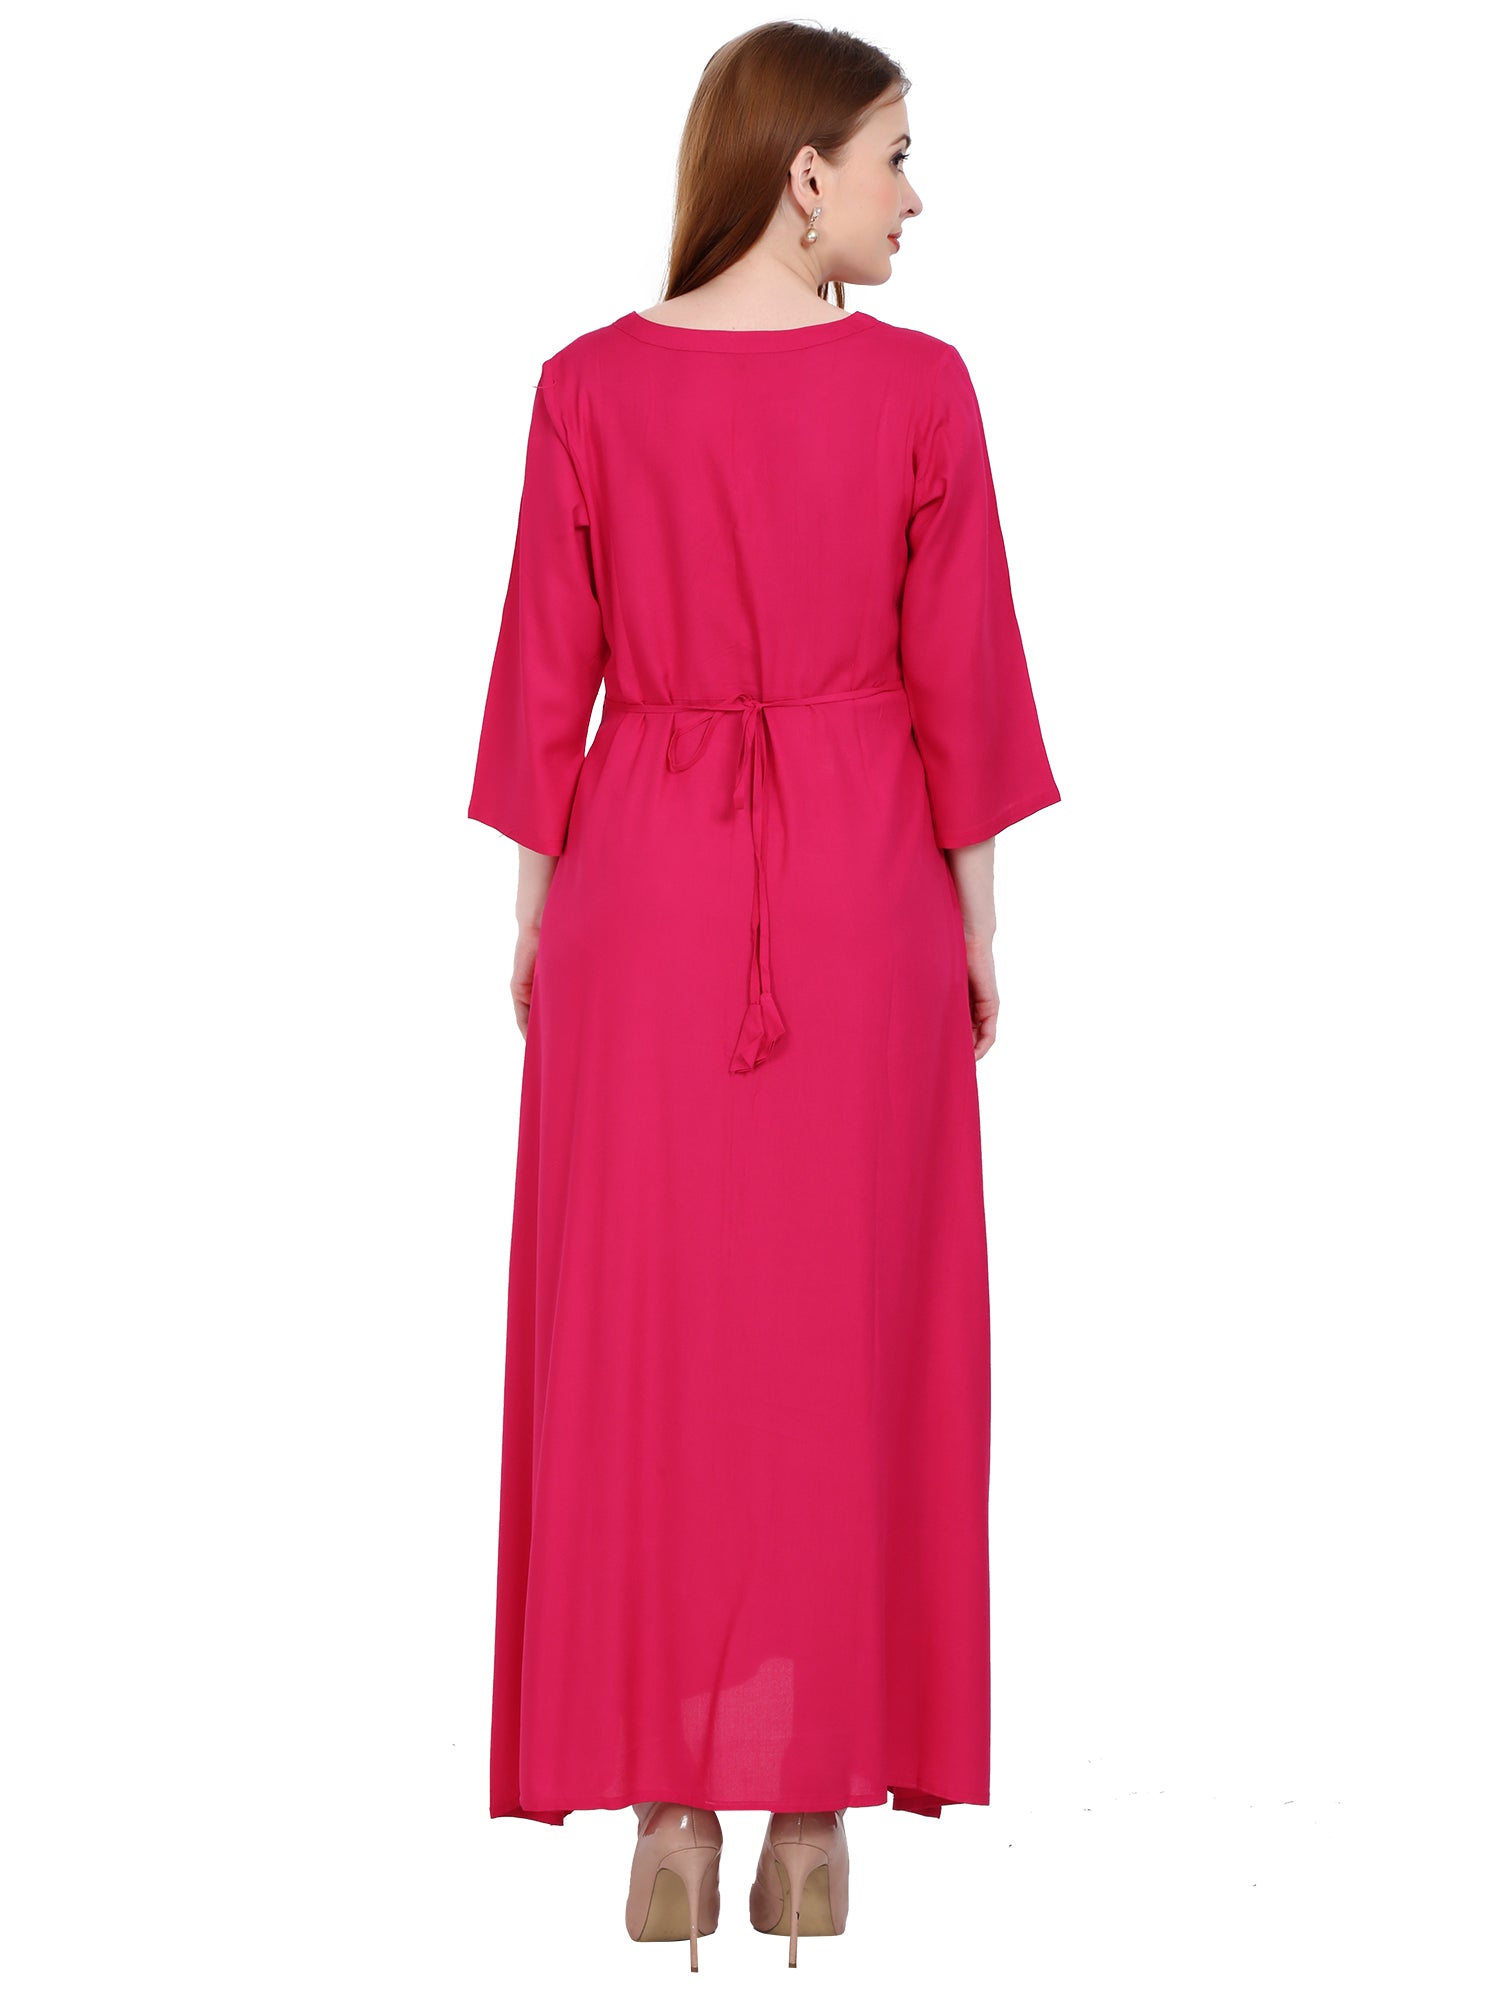 Rayon Pink Maternity and Feeding Dress with Cotton Lining